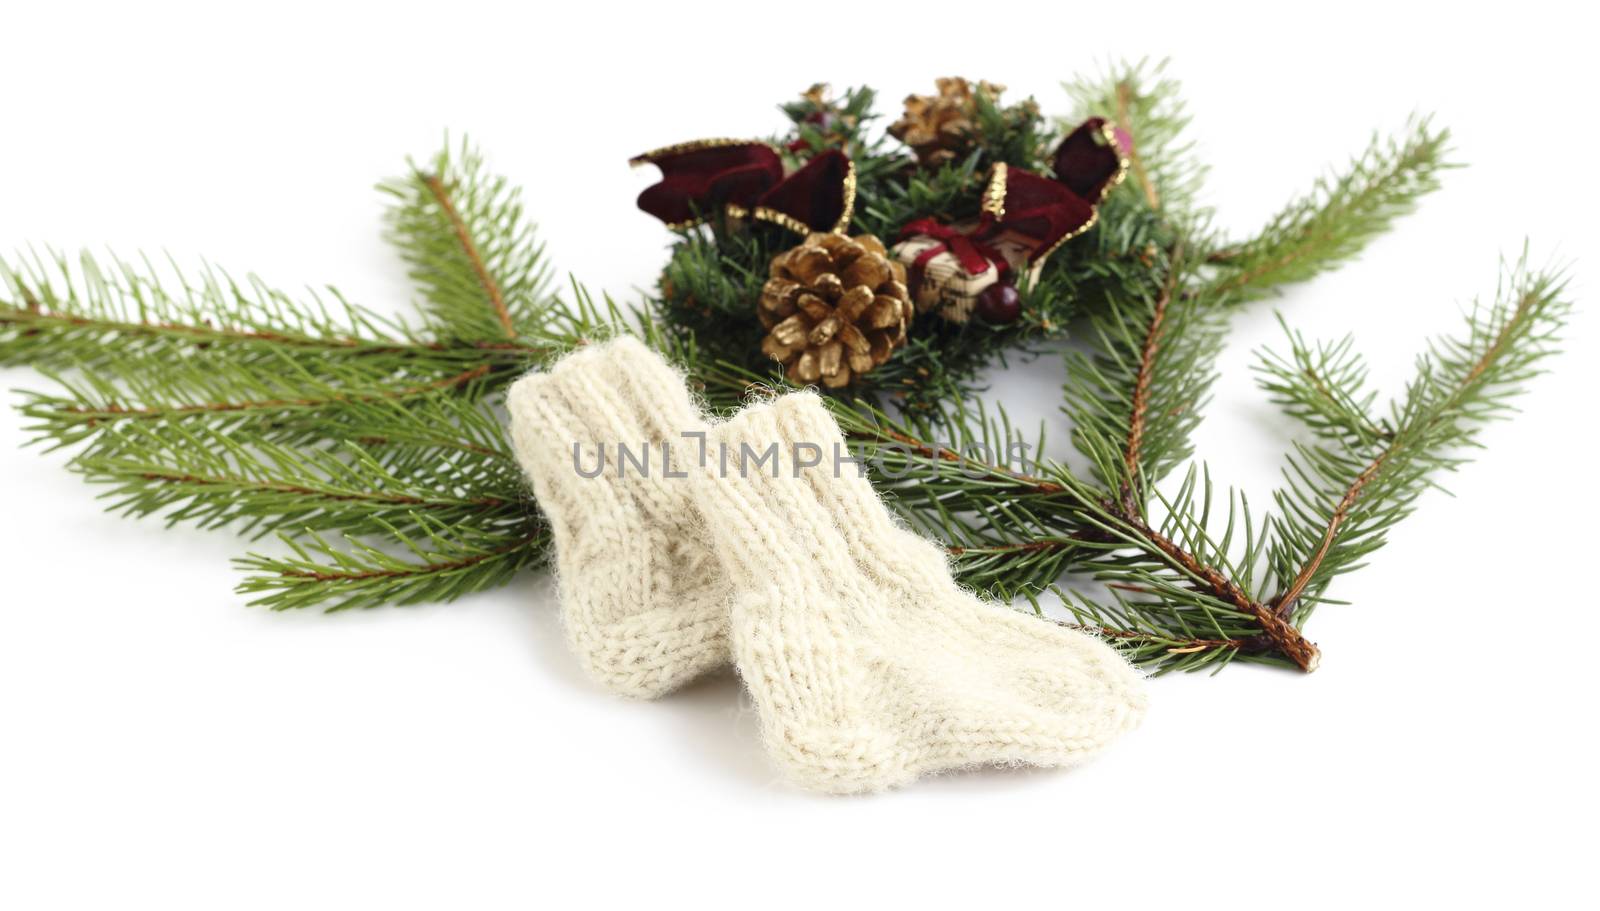 baby knitted woolen socks near spruce branches